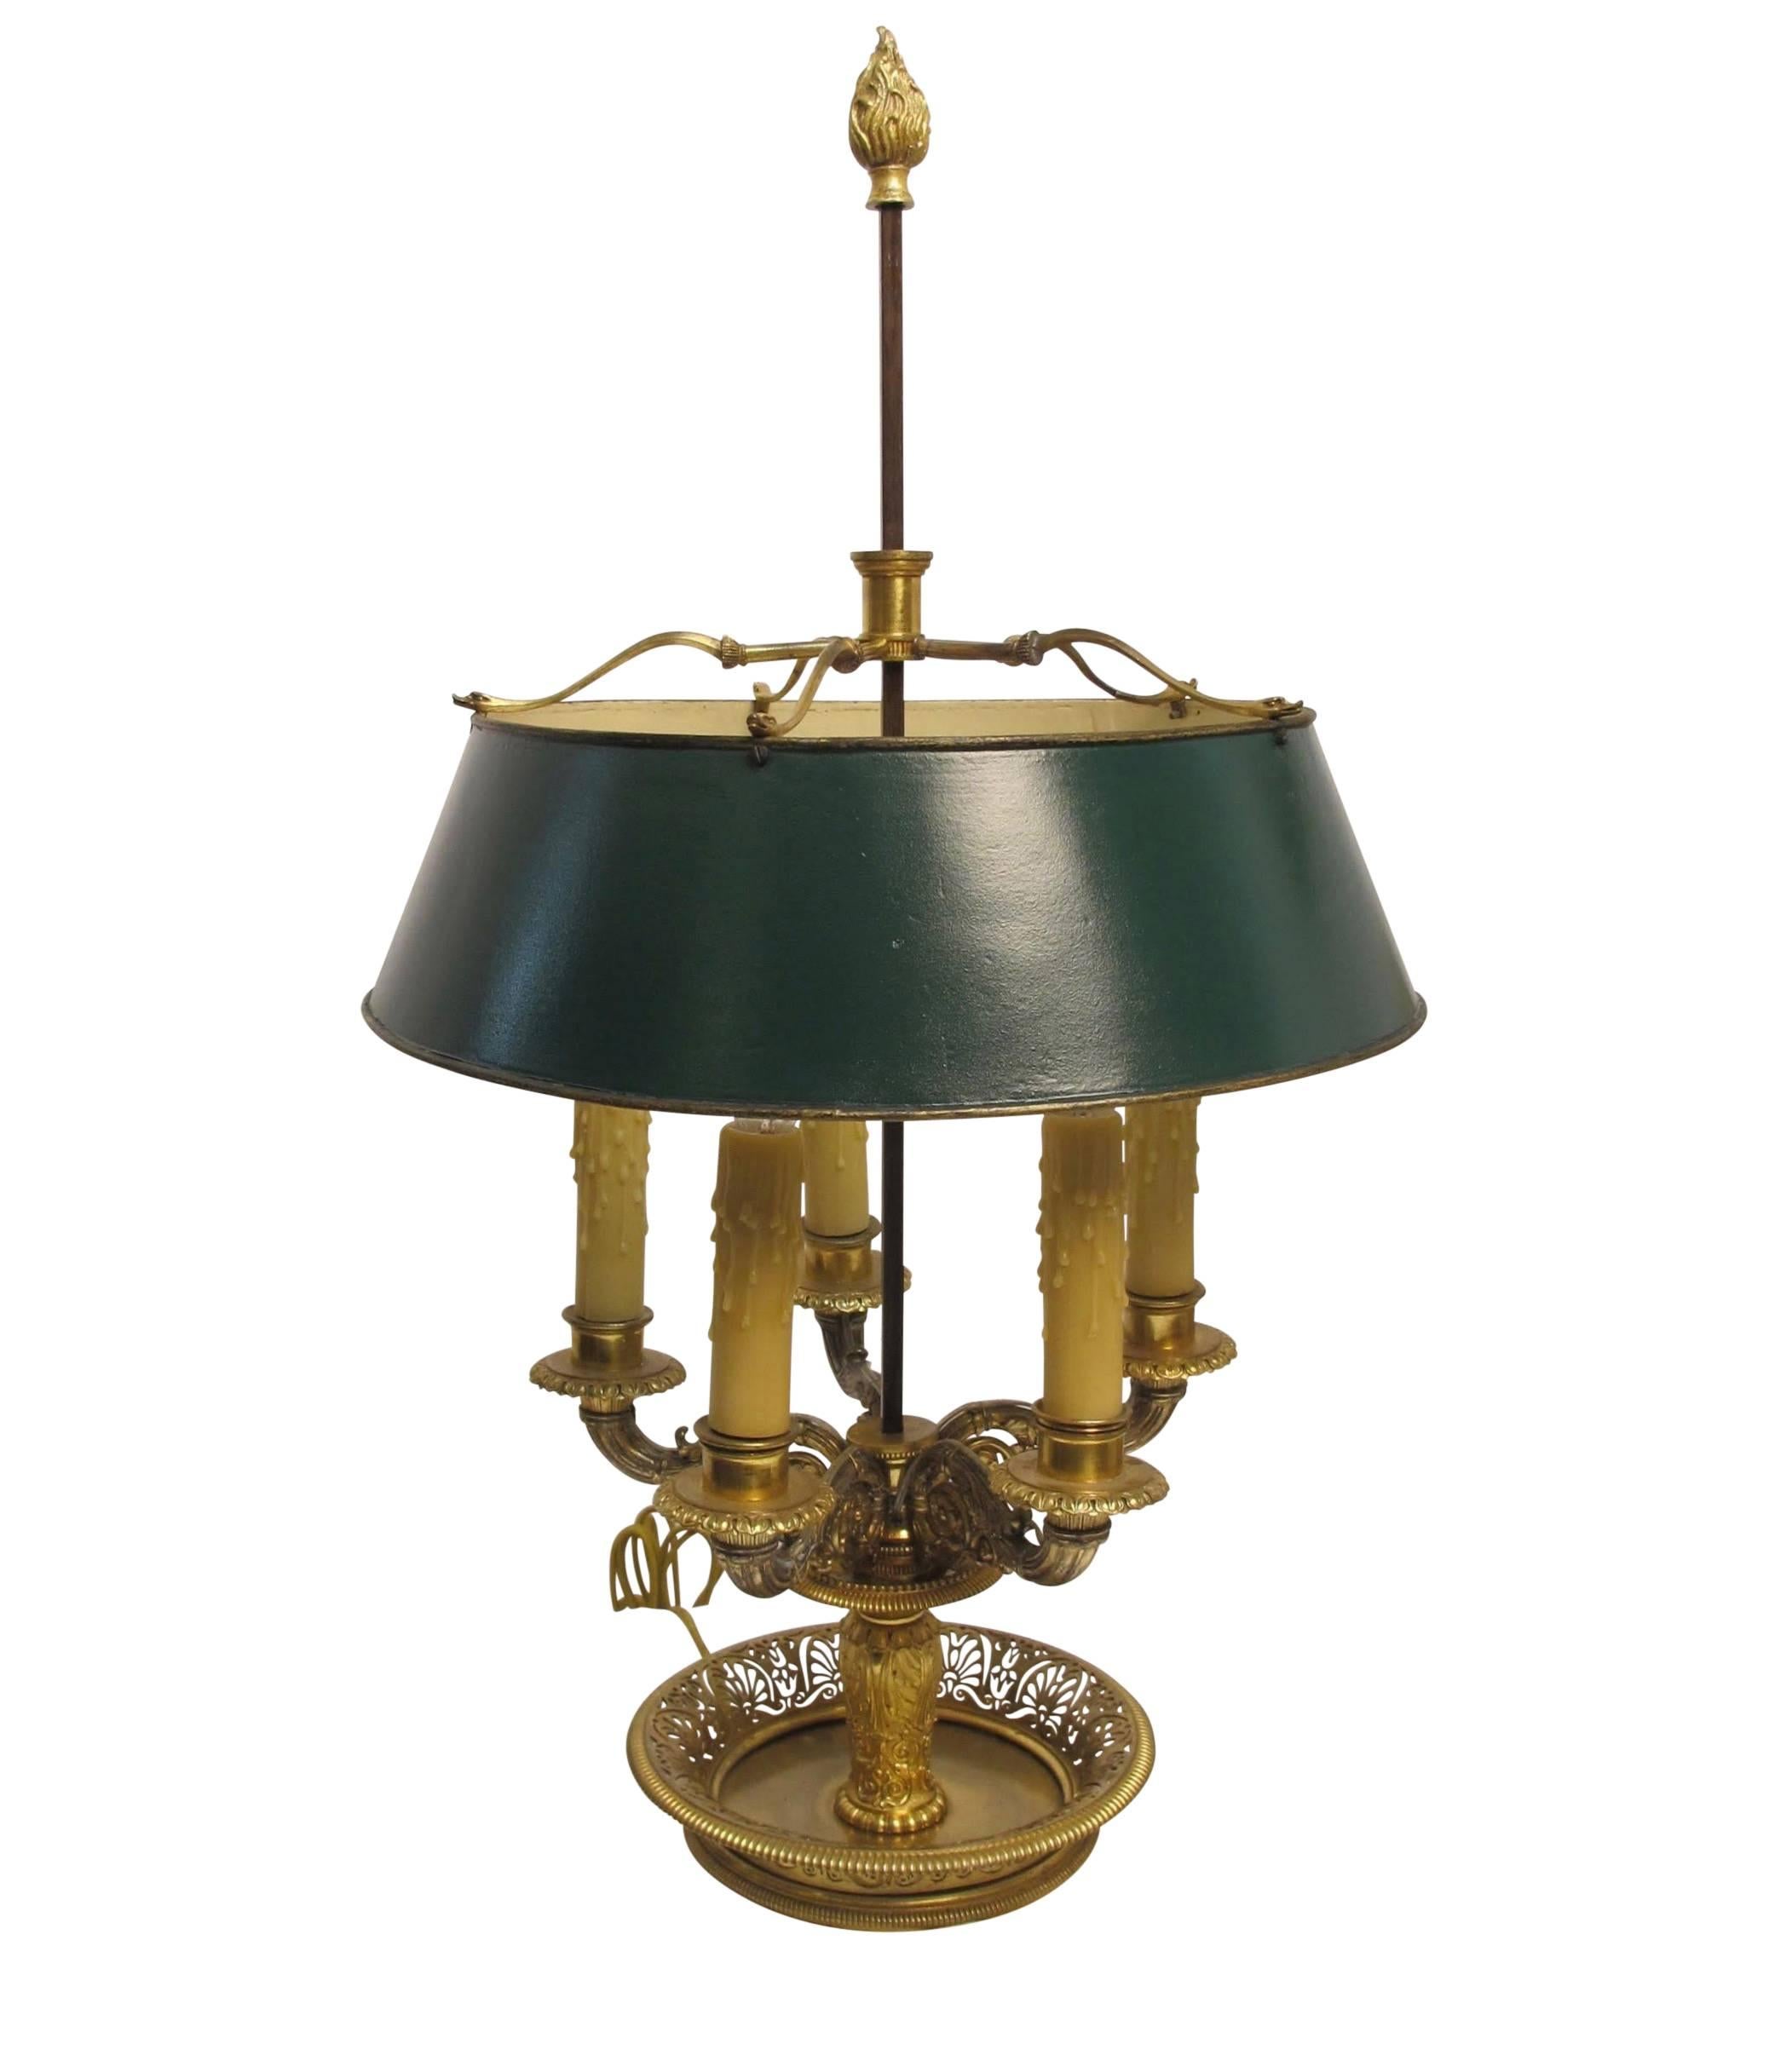 An extraordinary bronze bouillotte table lamp with original gilding and exquisite detail, having a green painted tin shade. Fine quality casting and hand cut open work in the tray. Newly re-wired and reconditioned, France, early 19th century.